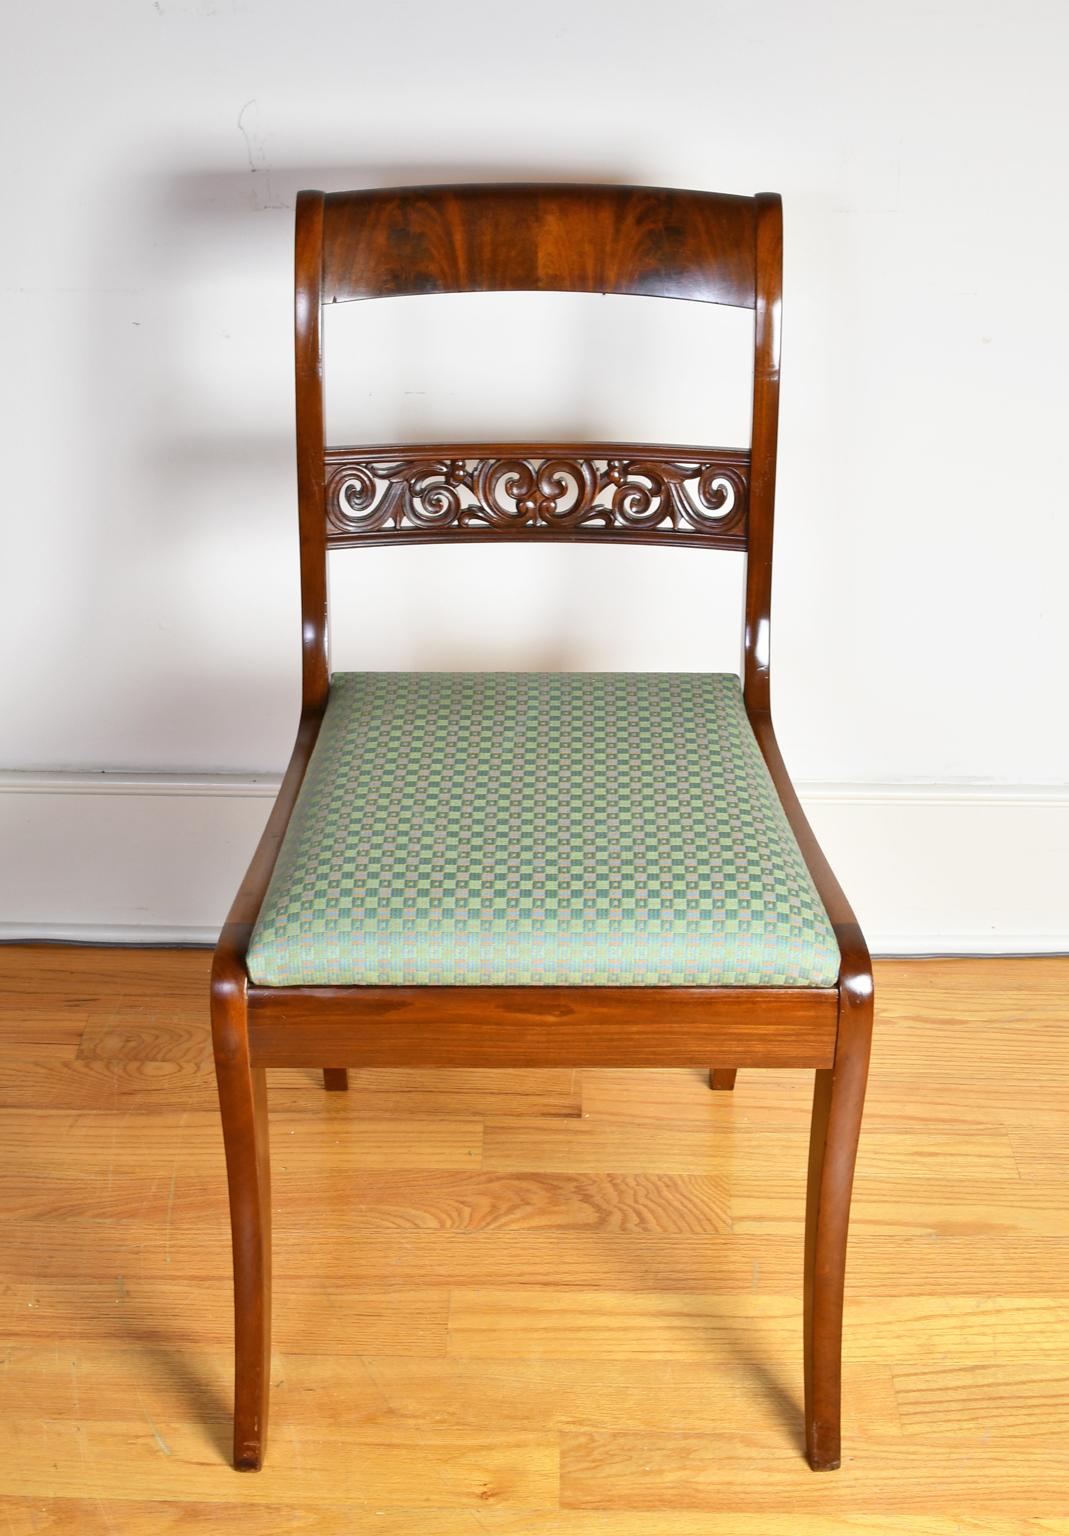 Set of 11 Antique Dining Chairs with 9 Sides & 2 Arms in West Indies Mahogany For Sale 4